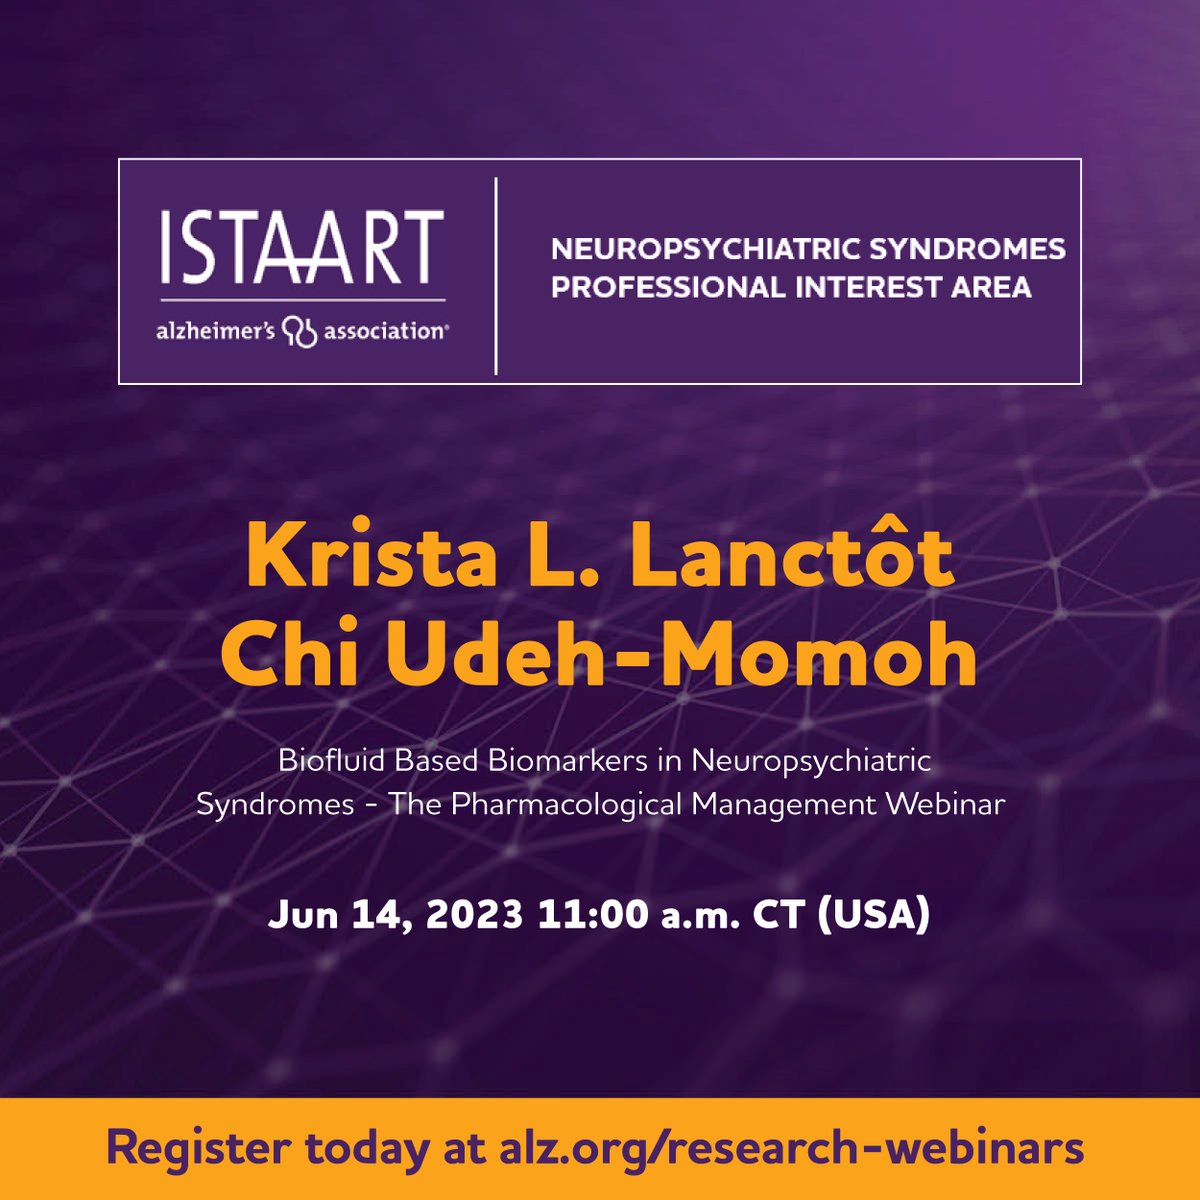 ❗Reminder ❗ The joint webinar between the @NeuroPsychPIA and @FluidMarkersPIA is TODAY, 6/14/23 at 11AM CT! @KristaLanctot and Chi Udeh-Momoh will be presenting on Biofluid Based Biomarkers in Neuropsychiatric Syndromes. Register at alz.org/research-webin…